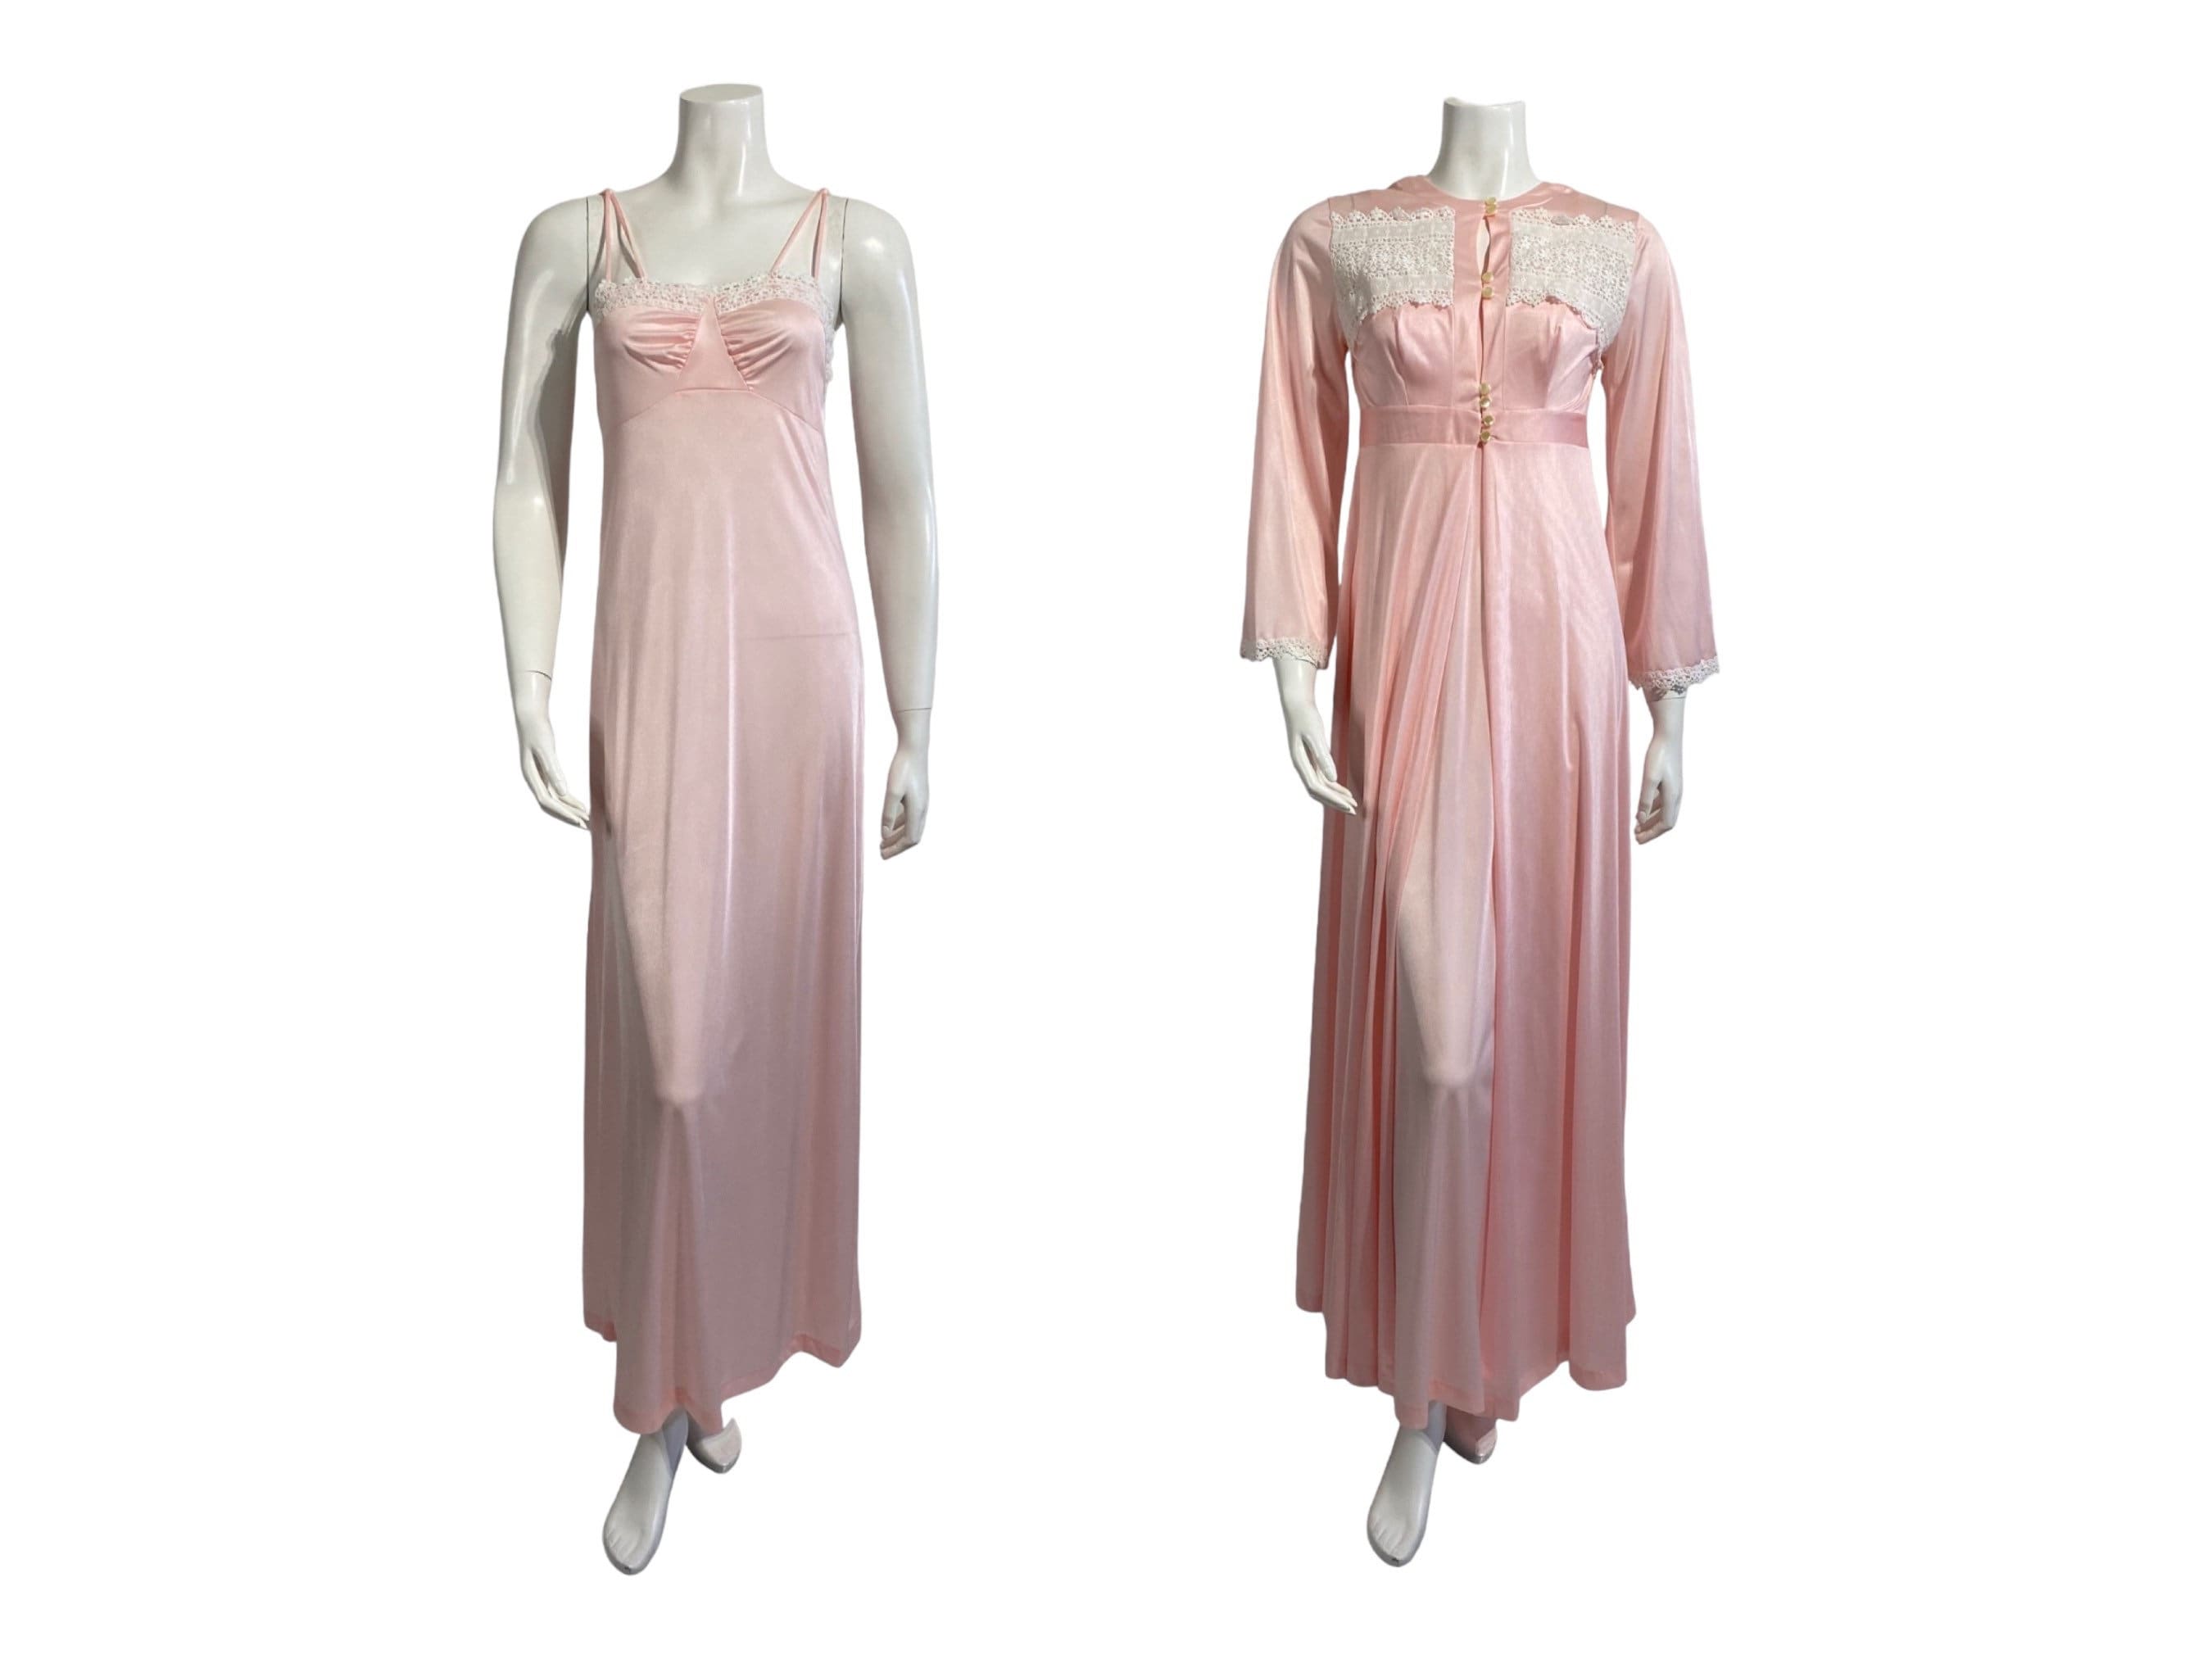  STJDM Nightgown,Fairy Night Gown Robe Sets for Women